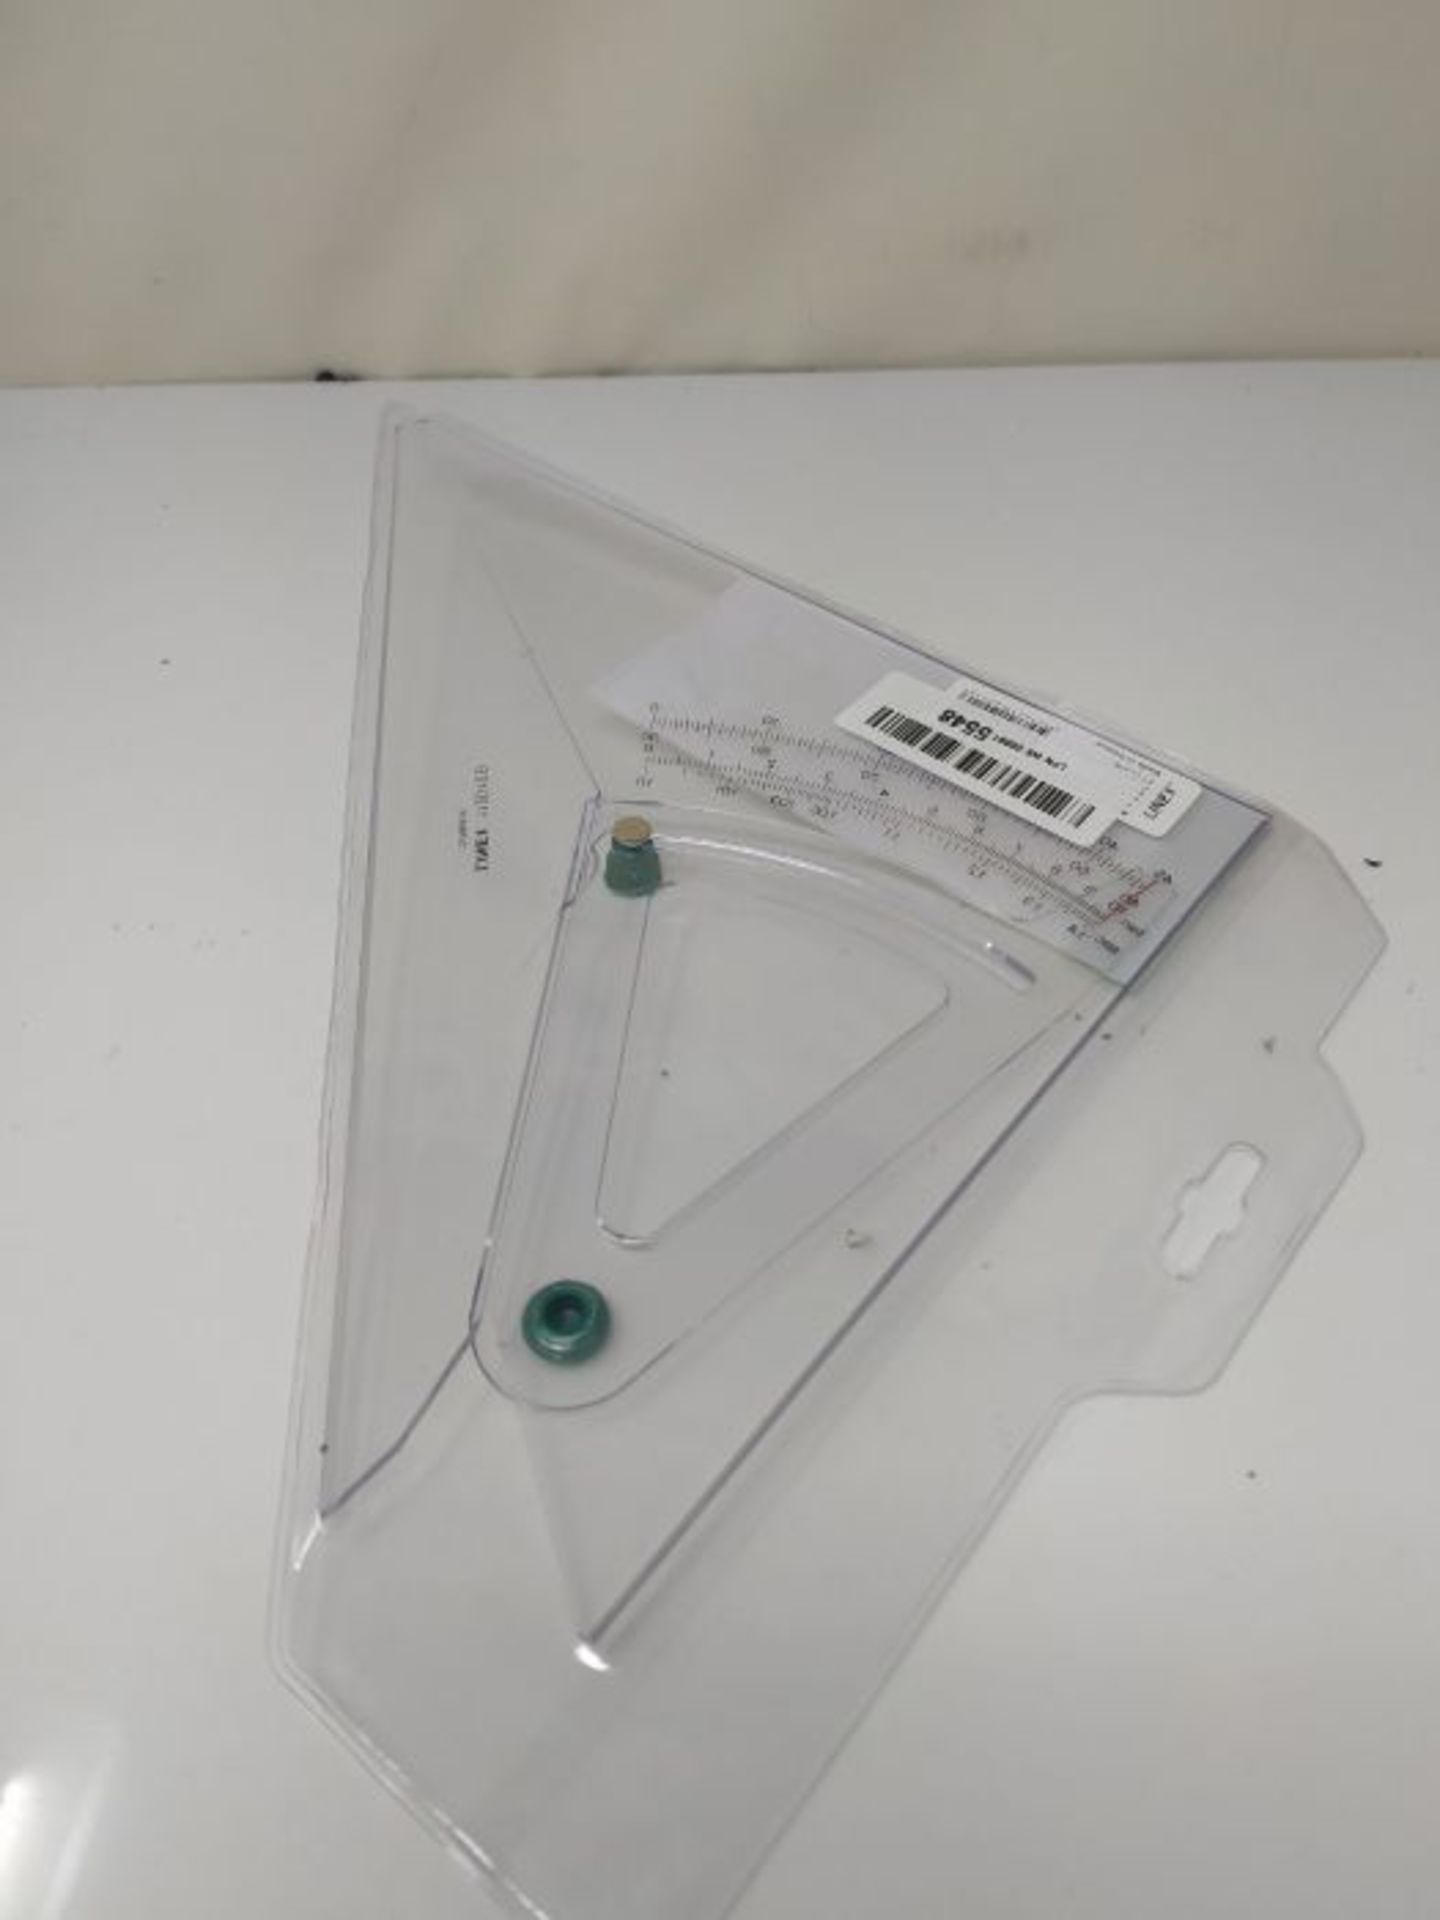 Linex Set Square Adjustable Precision 0.5 Degree Scale Bevelled Edge Long 250mm Clear - Image 2 of 2